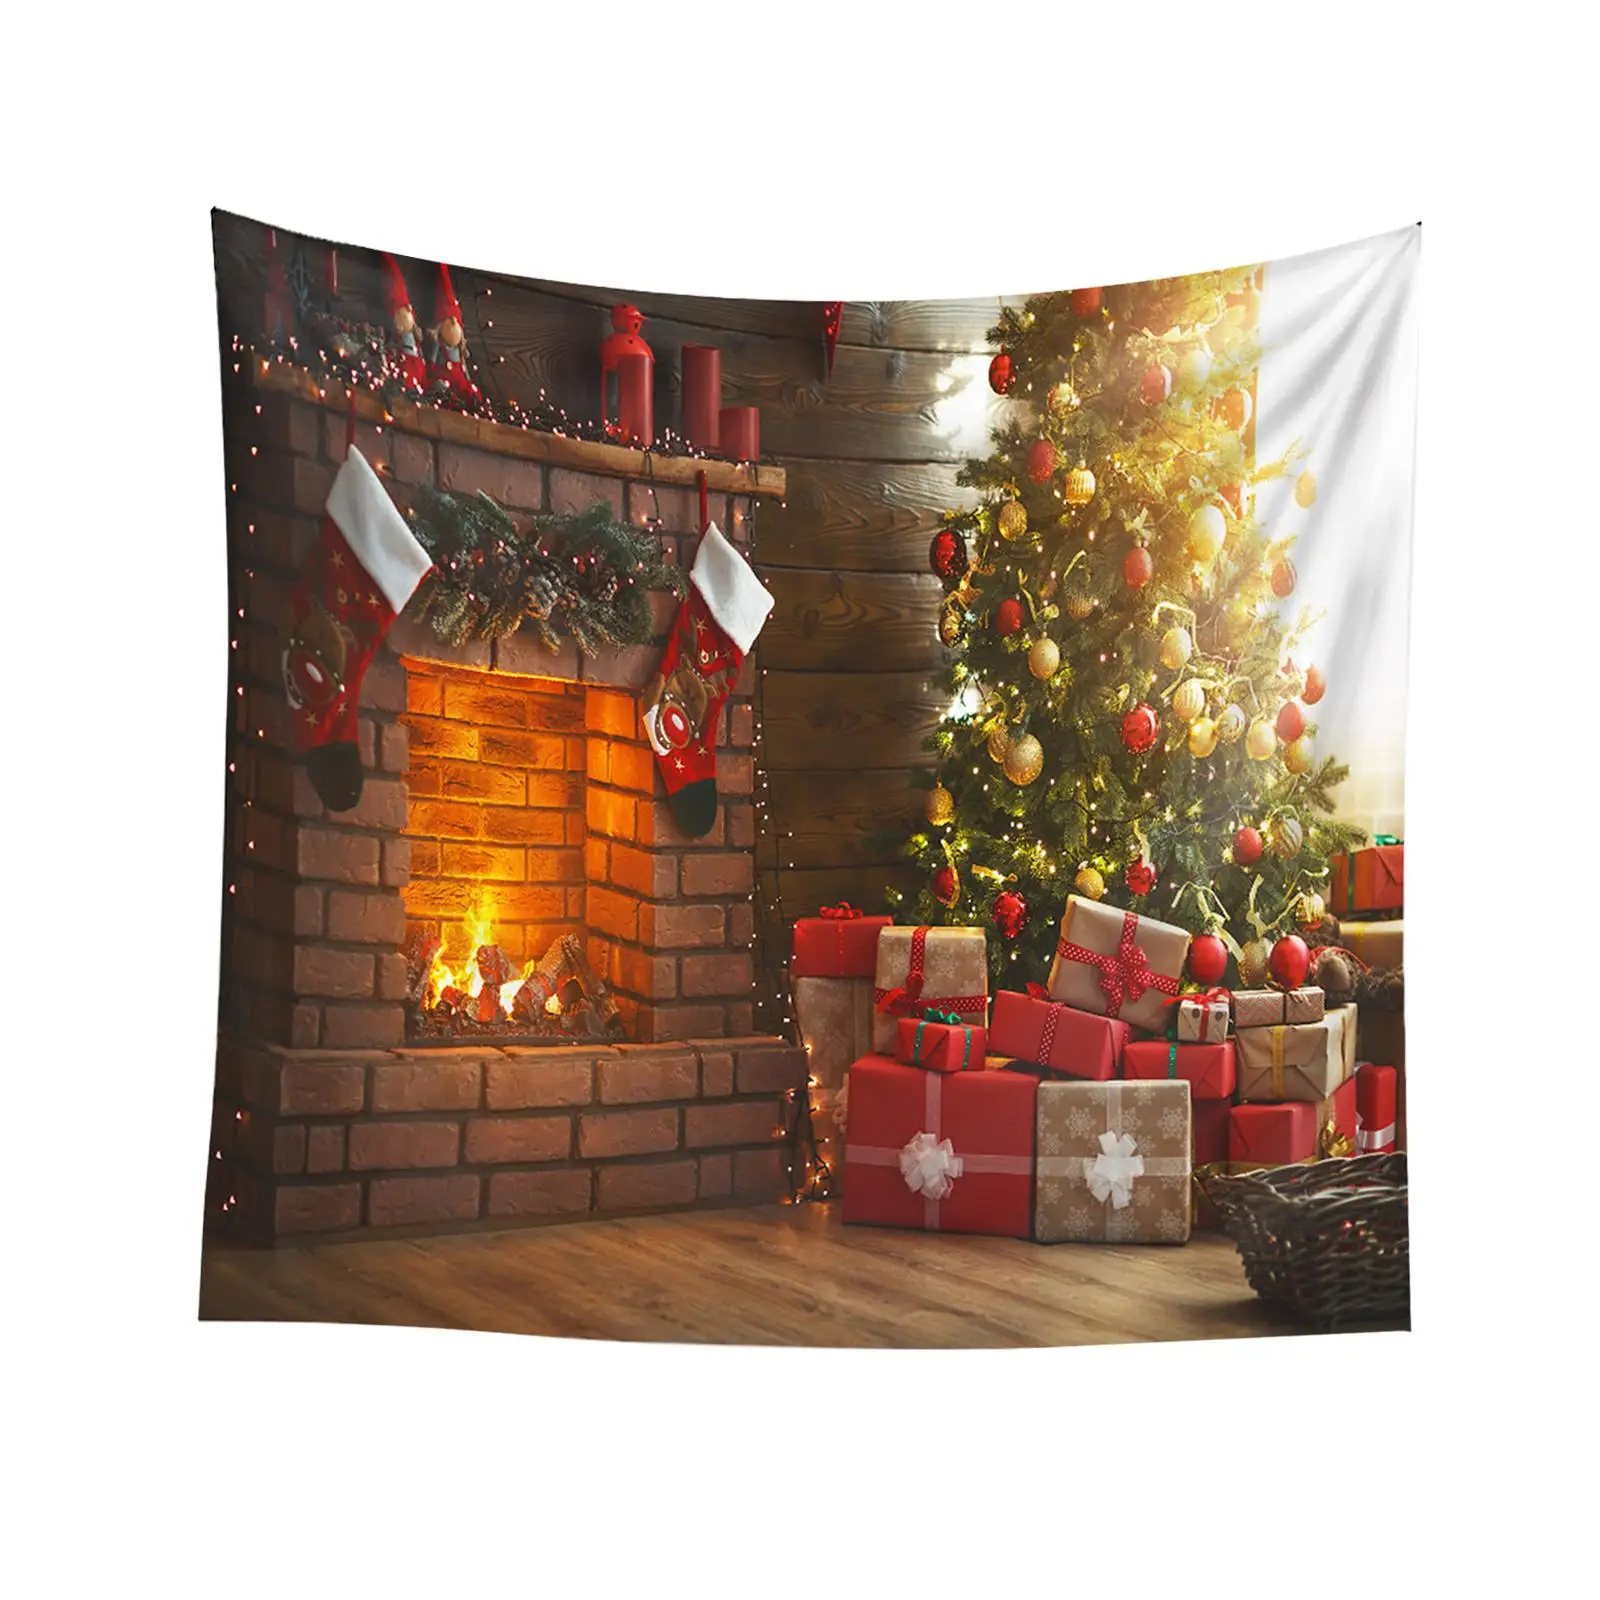 Portable Christmas Photography Background Winter Tapestry Wall Hanging Tapestry Christmas Tapestry for Bedroom Home Decoration